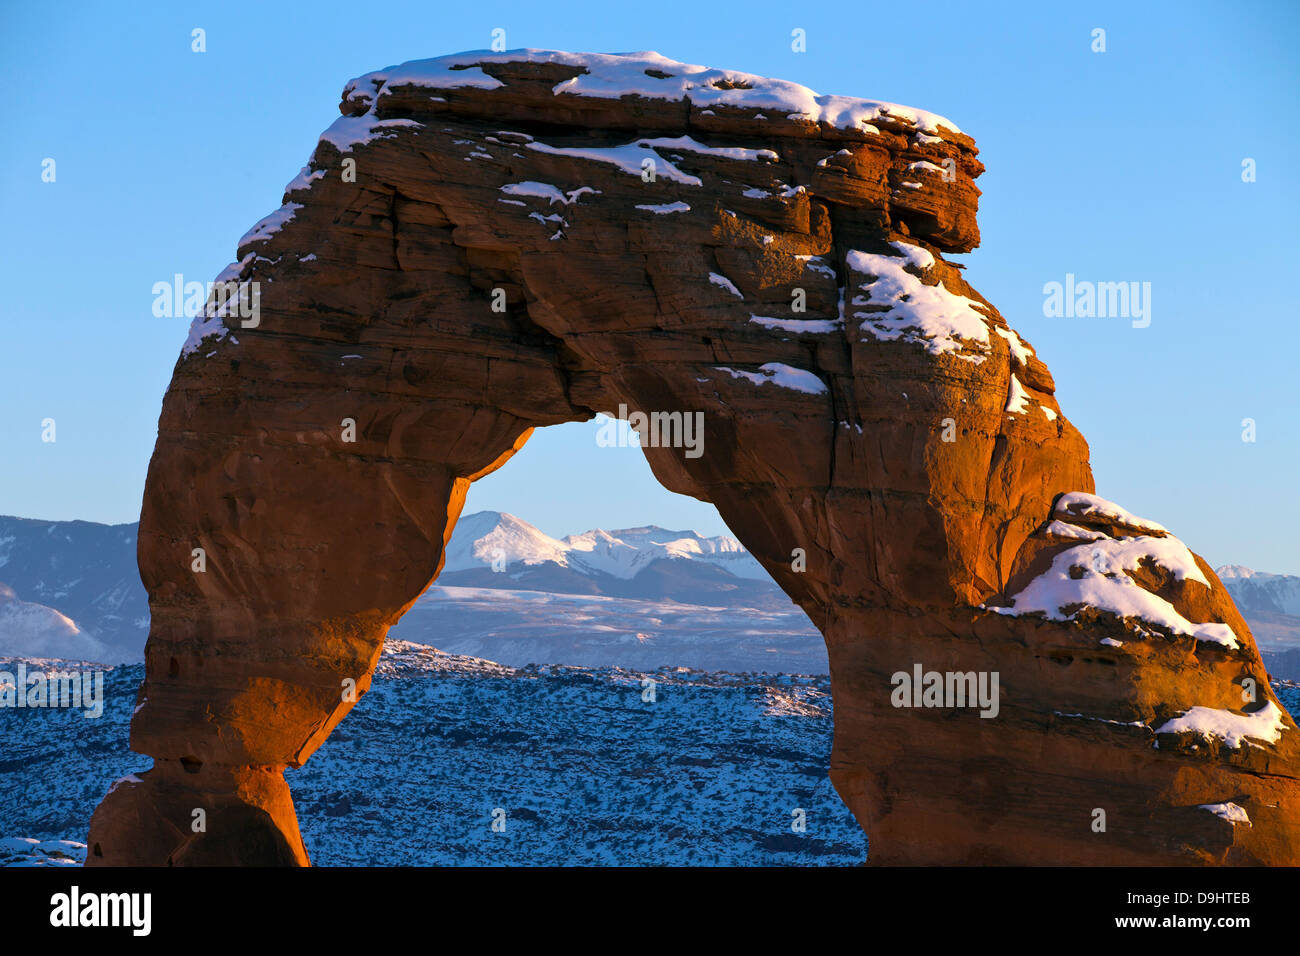 Detailed view of Delicate Arch with snow in winter at sunset, Arches National Park, Utah, United States of America Stock Photo